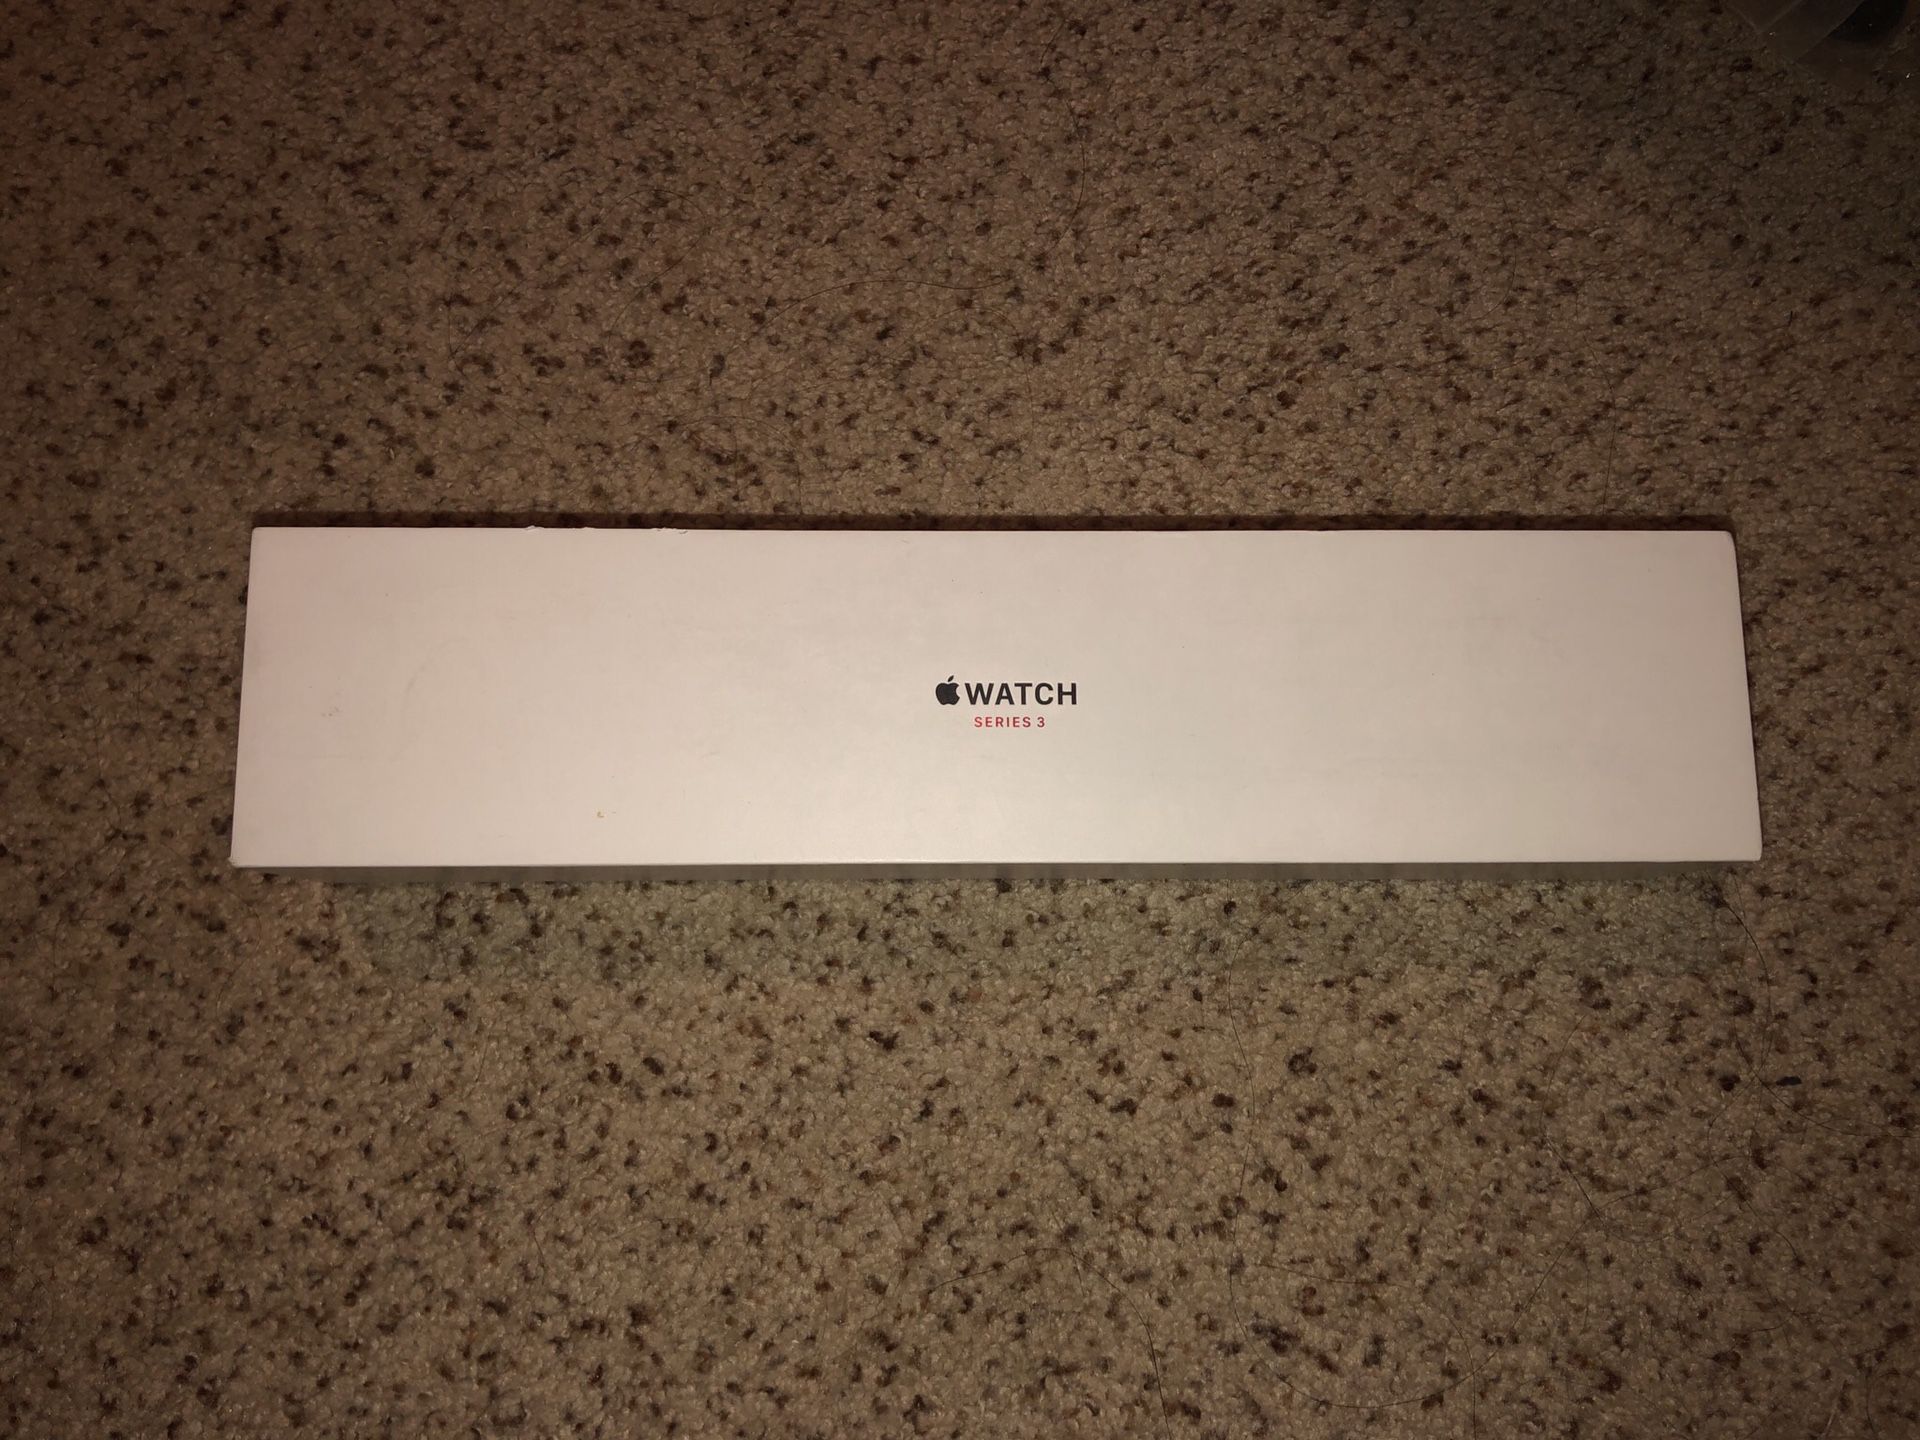 Apple Watch Series 3 (BOX ONLY)